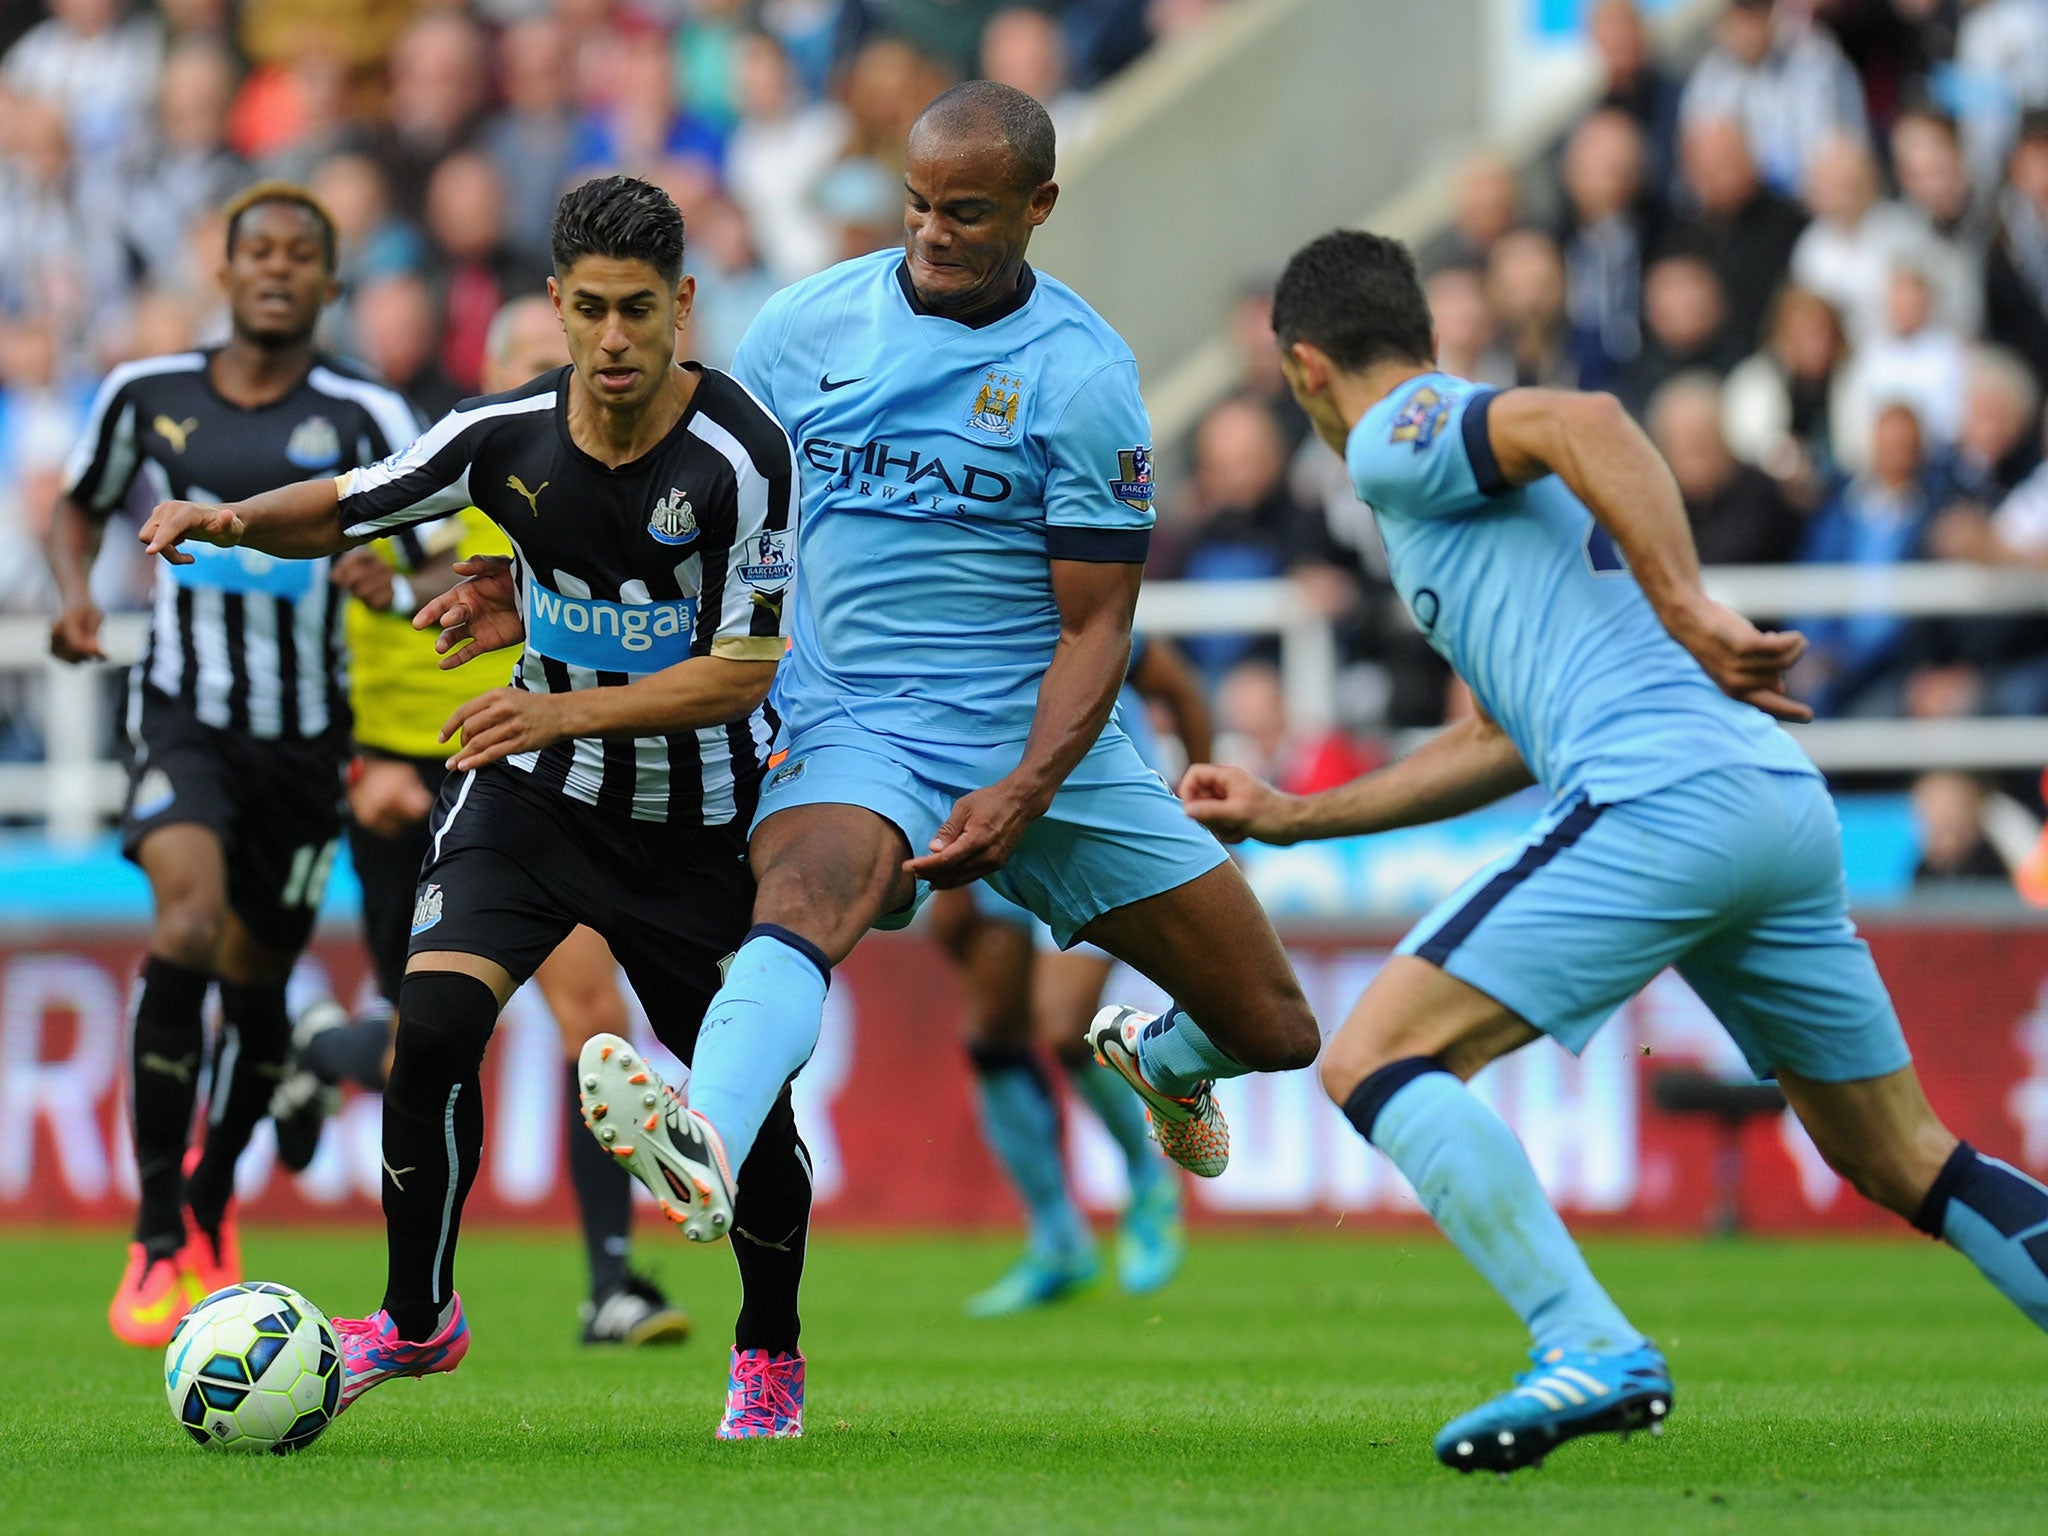 Manchester City captain Vincent Kompany says Liverpool will not find this season so easy